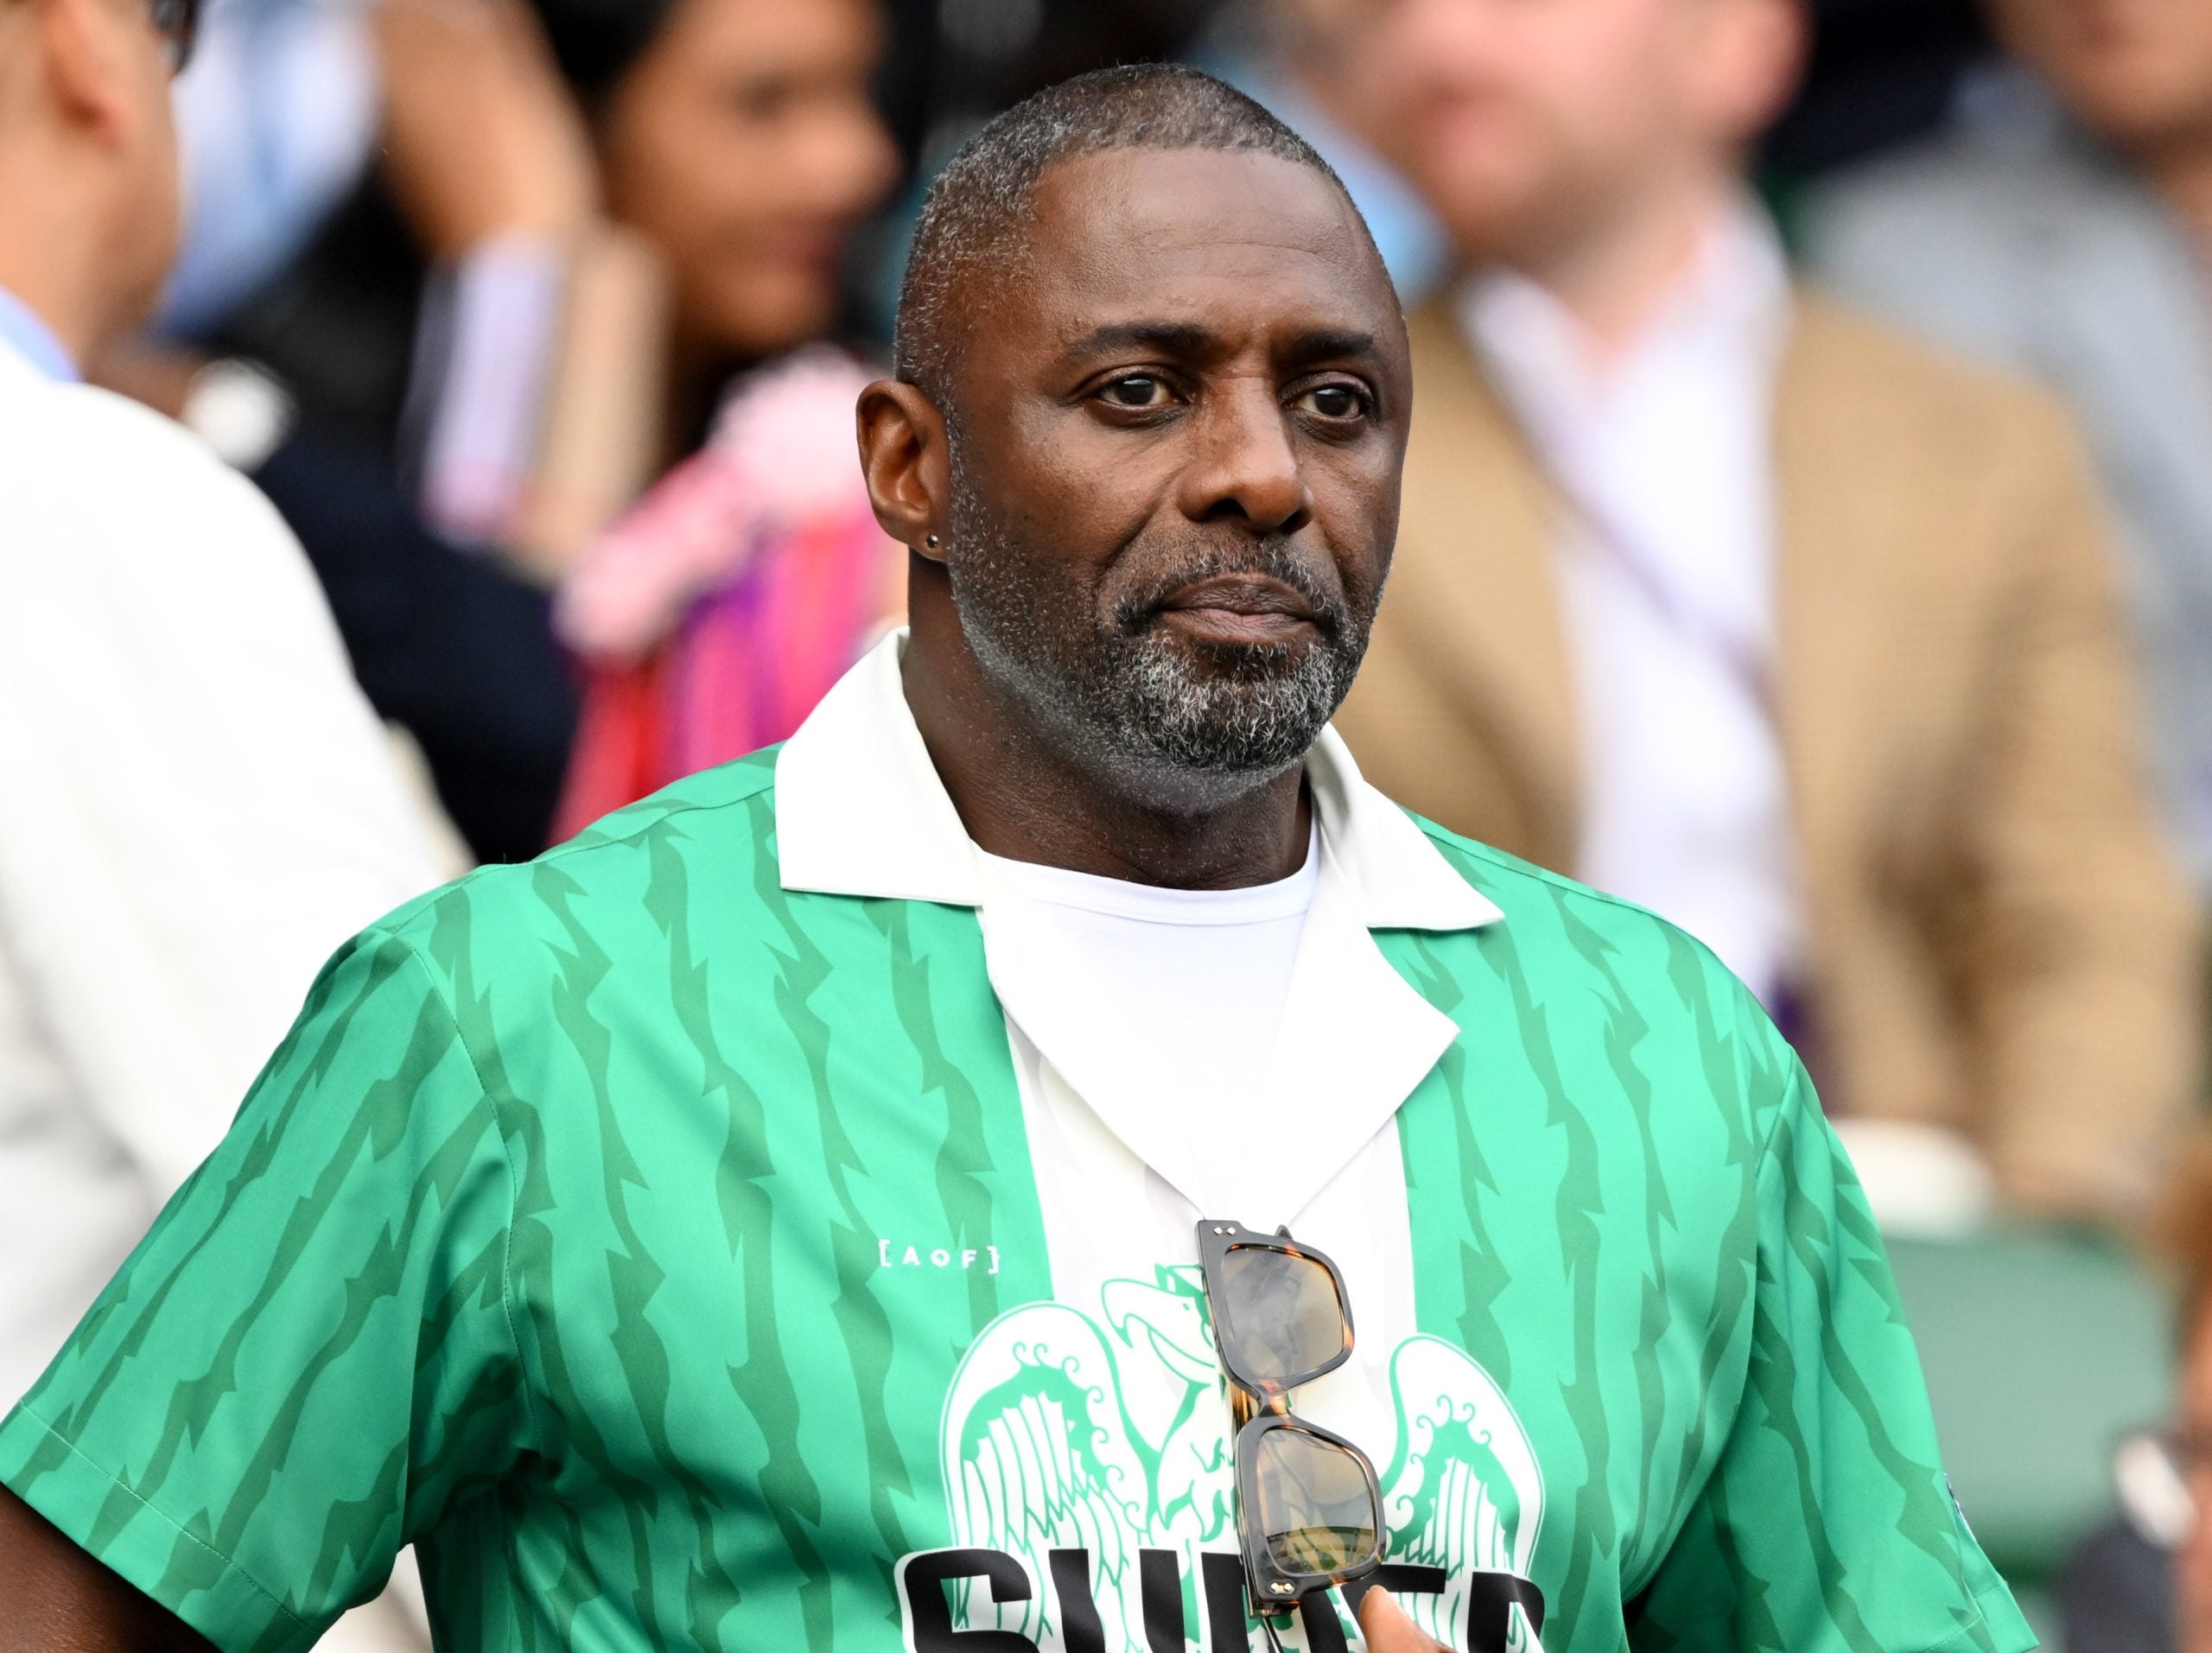 “I Nearly Lost My Life”: Idris Elba Recalls Having A Gun Pulled On Him While Trying To Diffuse A Domestic Incident